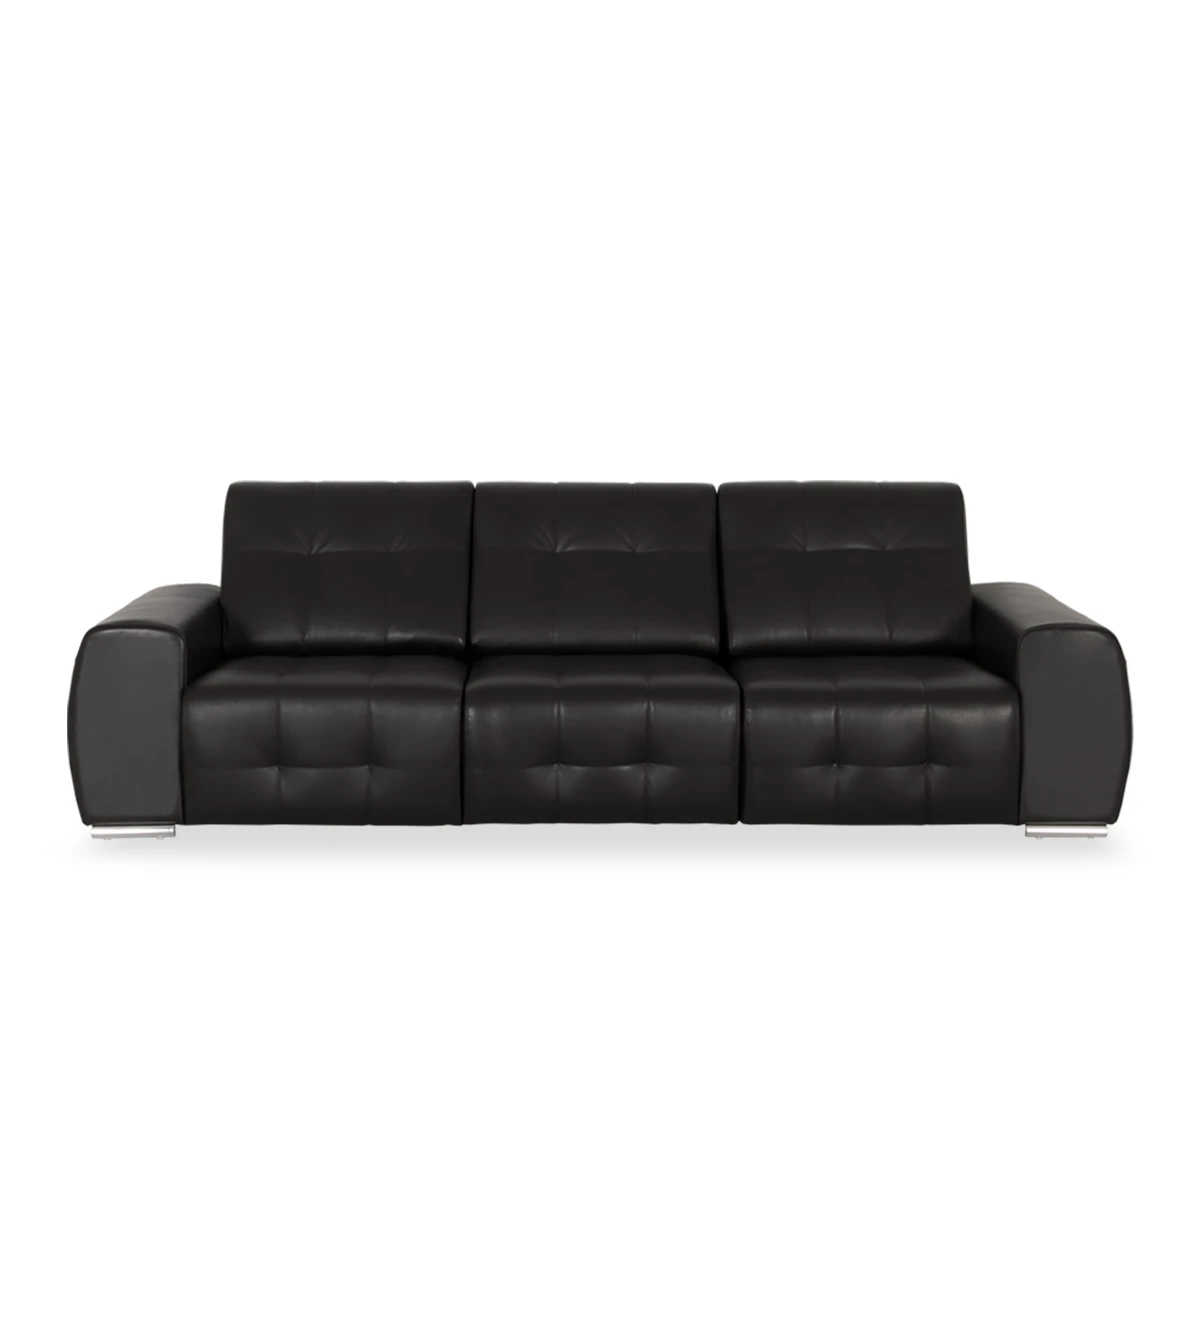 3 seater, upholstered in black eco-leather, with chrome legs.